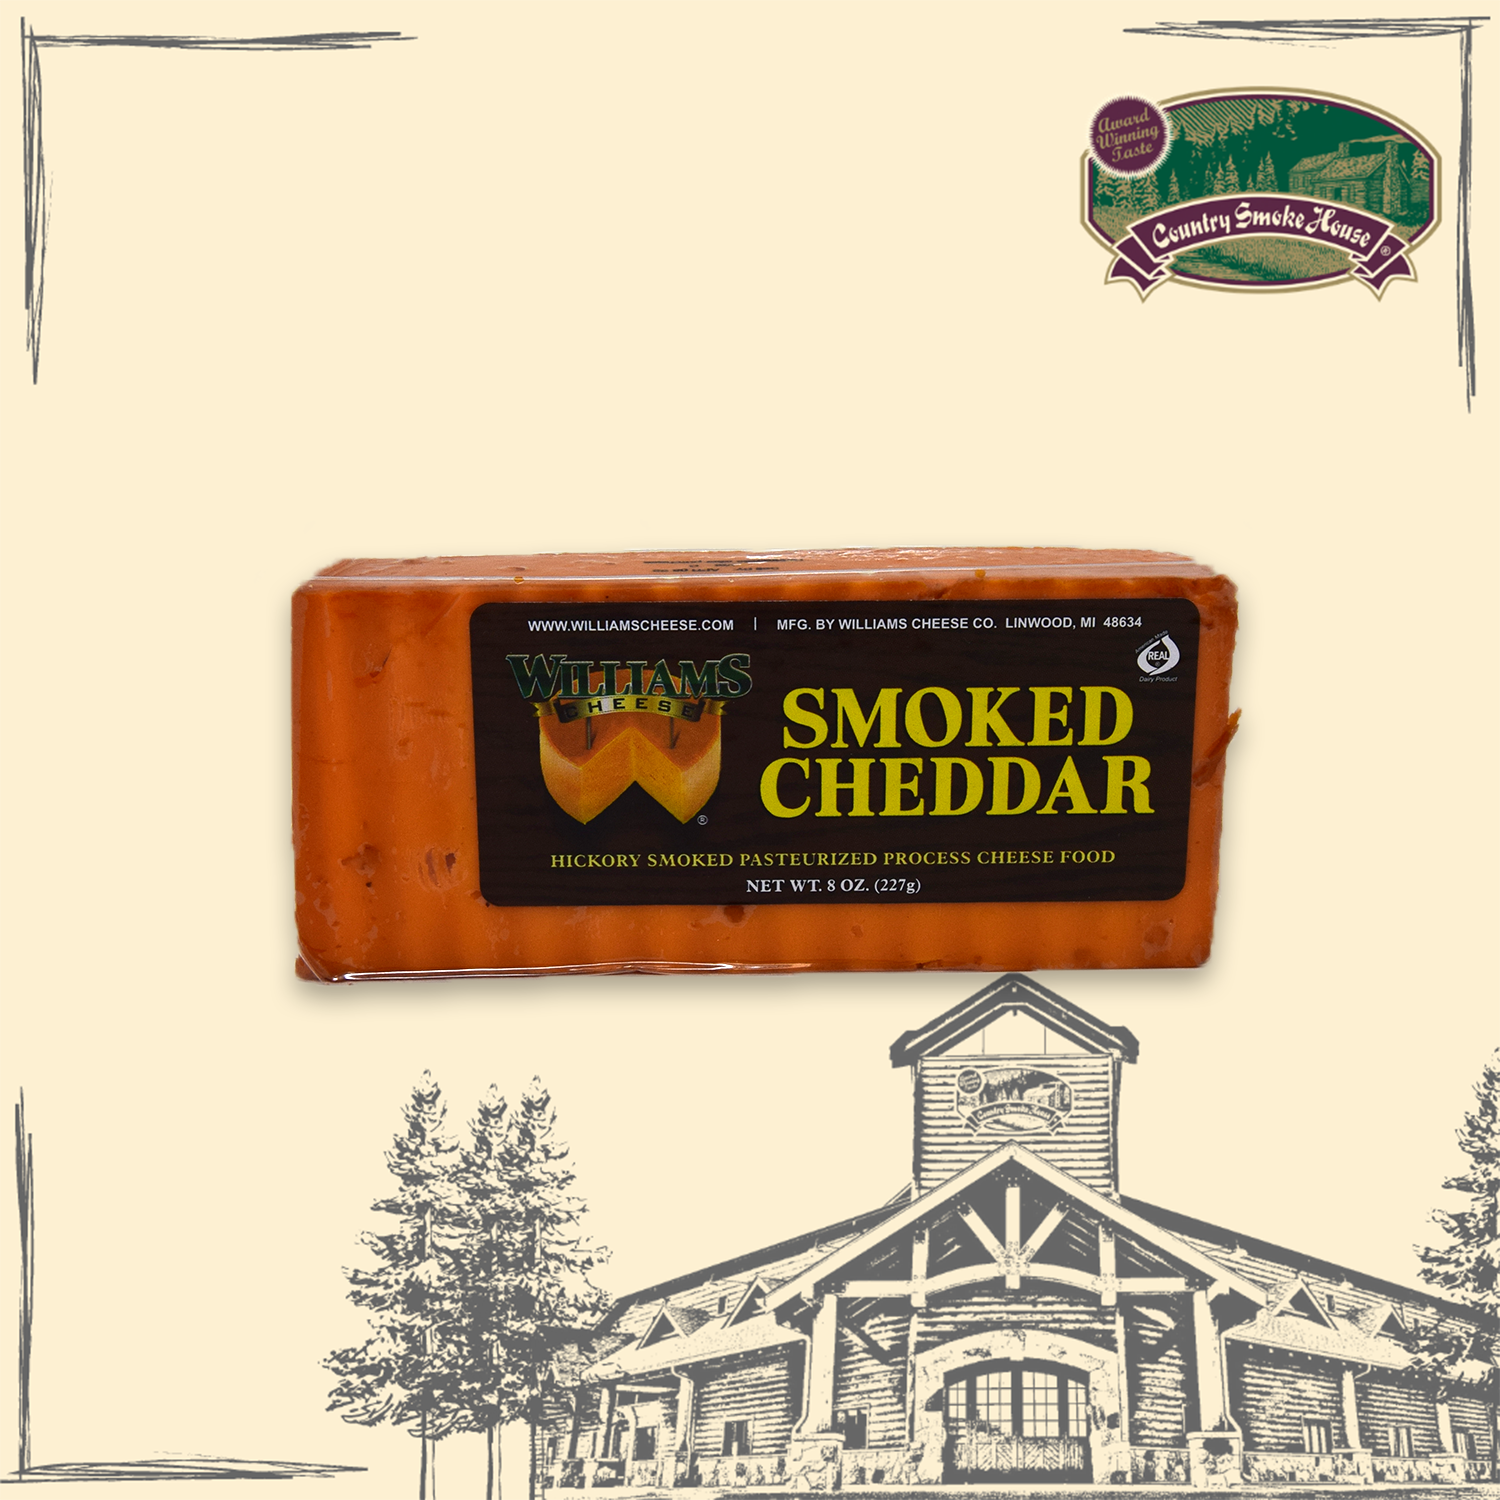 William's Smoked Cheddar Cheese